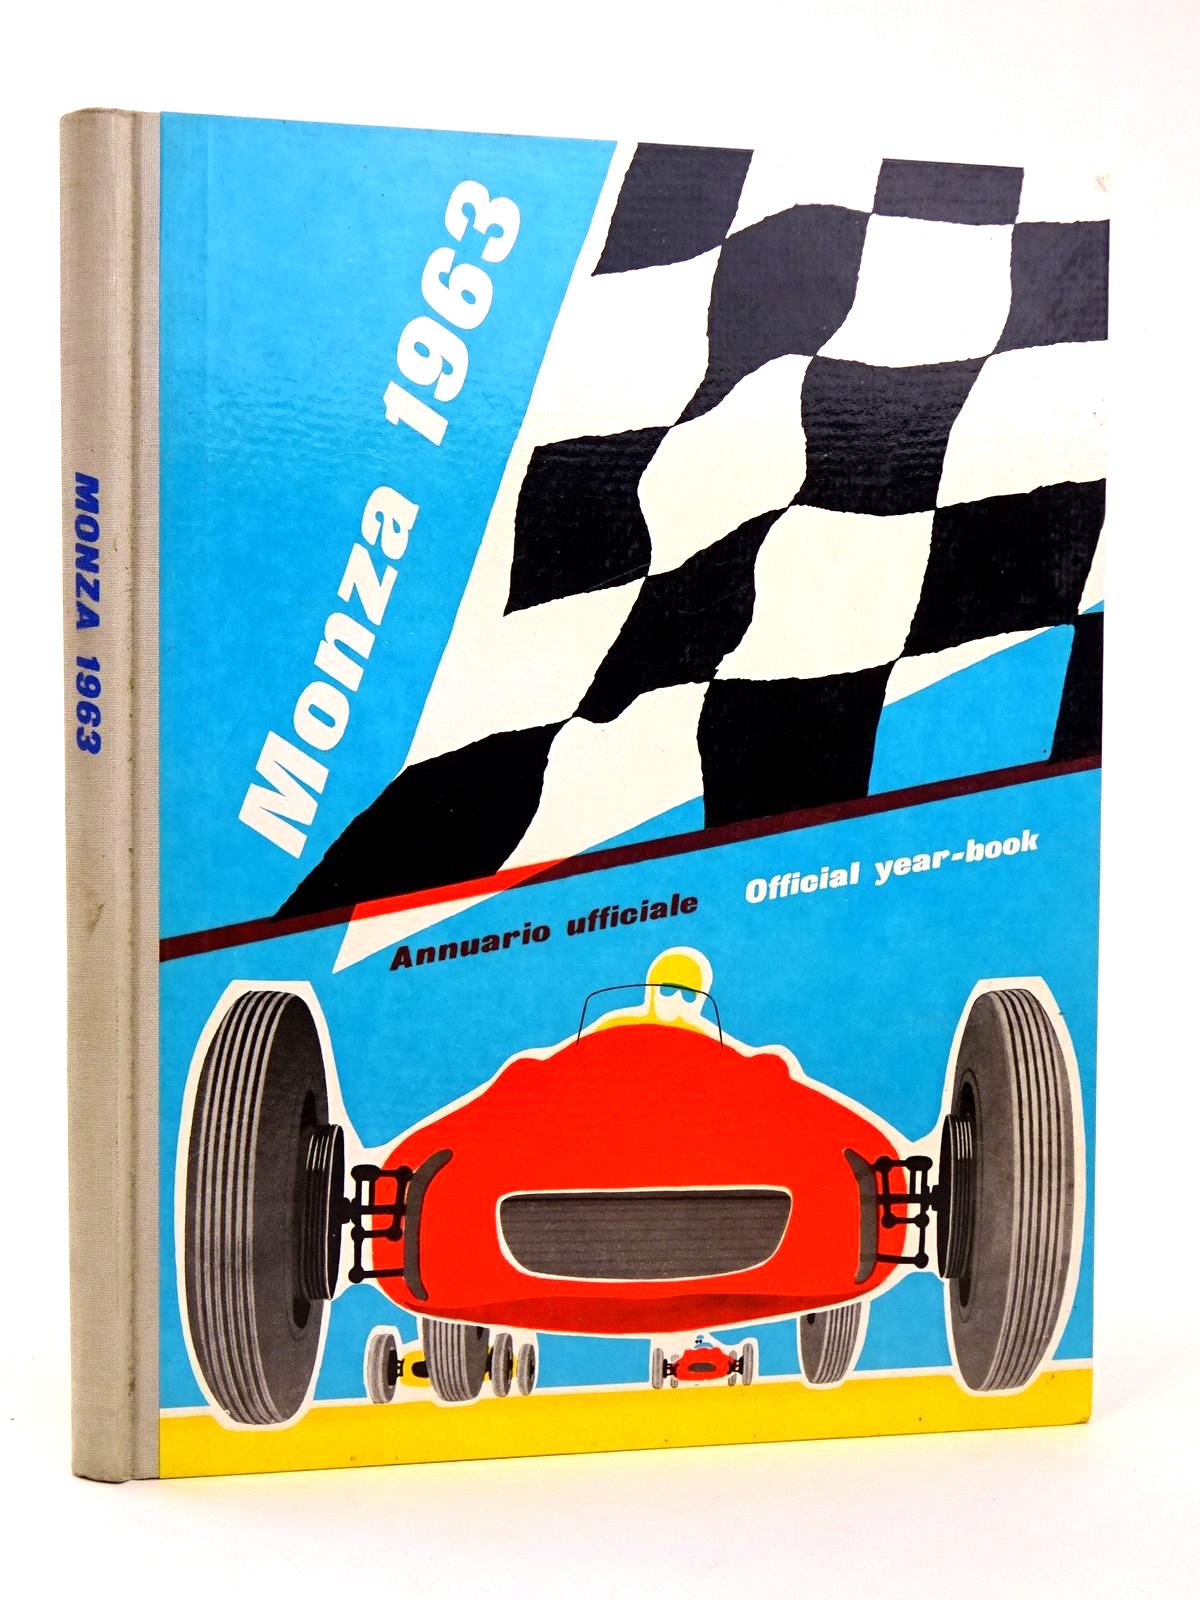 Photo of MONZA 1963 OFFICIAL YEAR-BOOK published by SIAS (STOCK CODE: 1818568)  for sale by Stella & Rose's Books